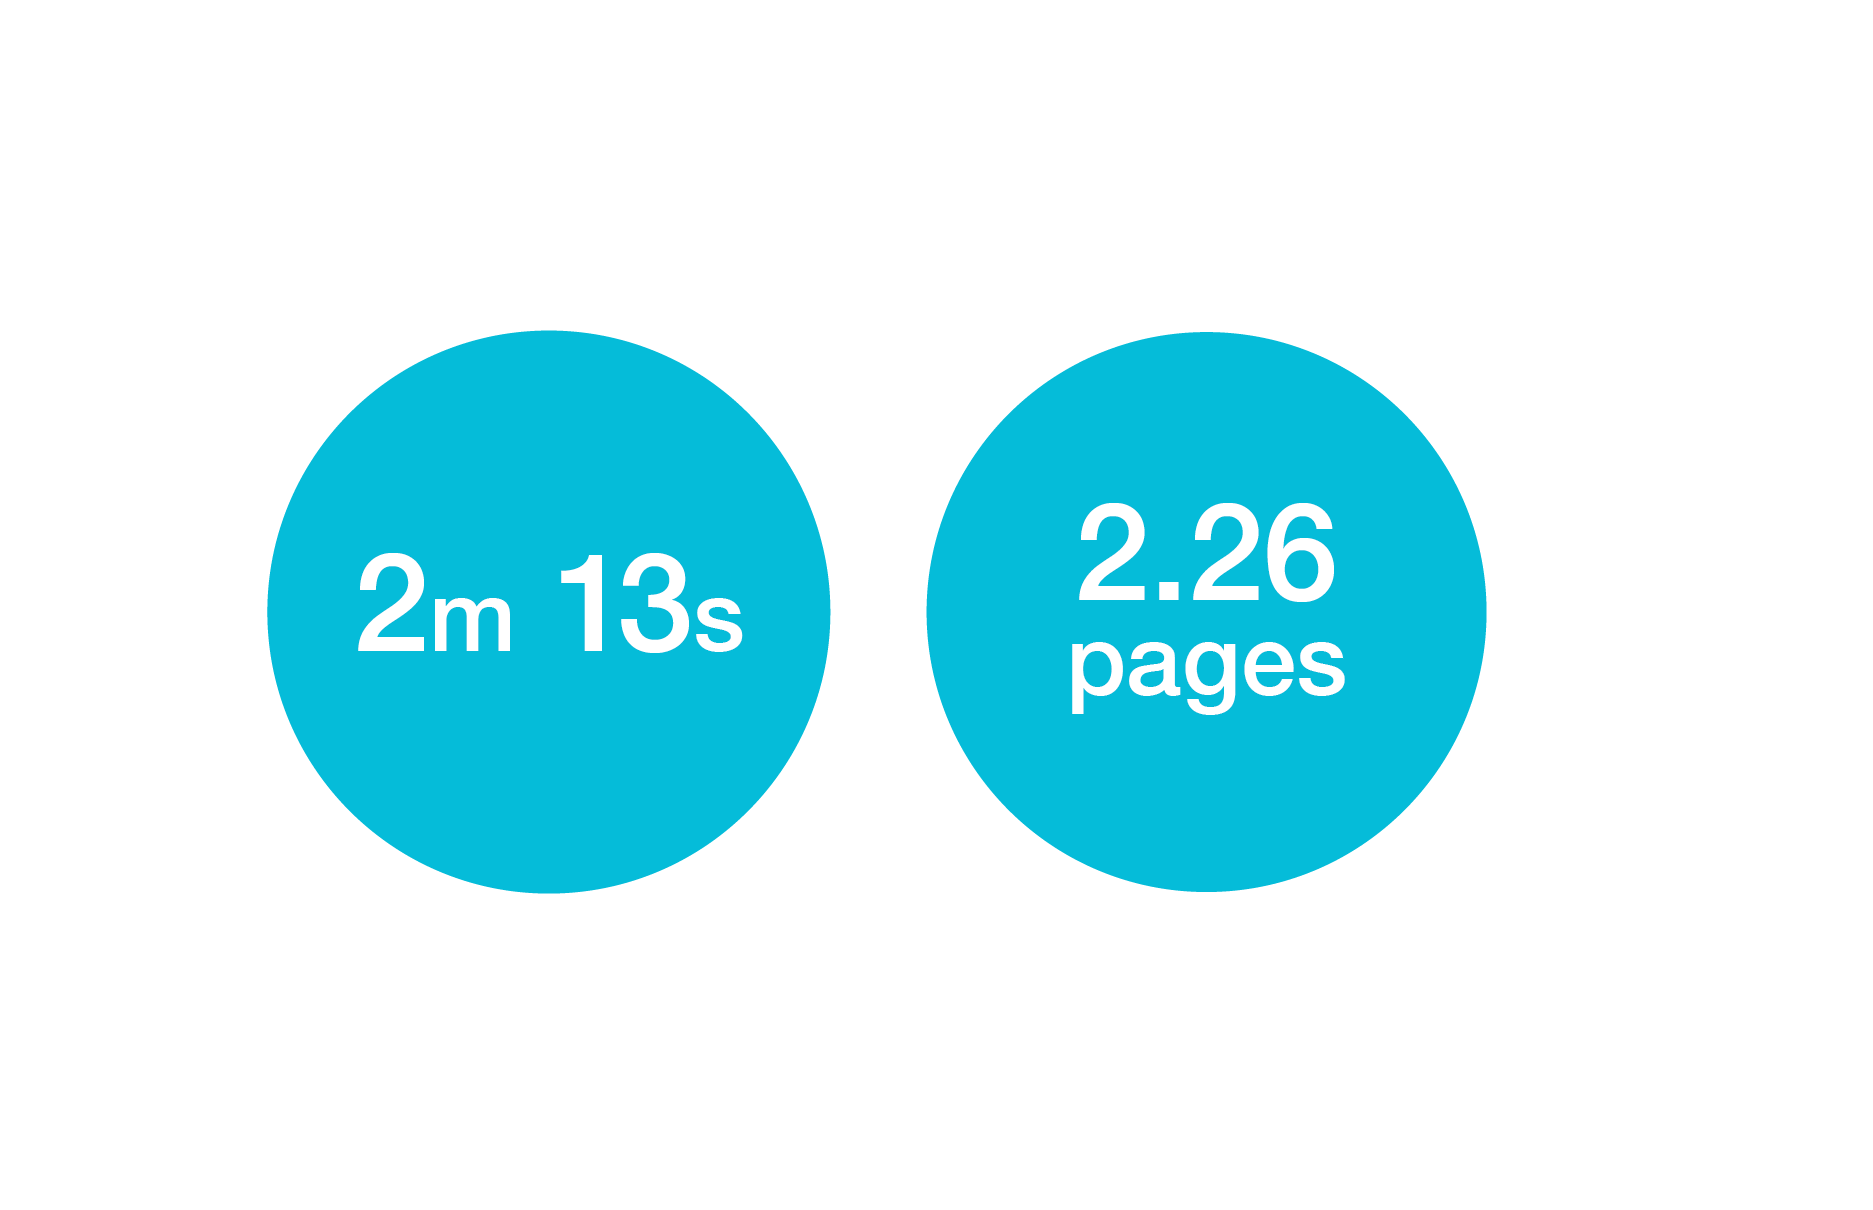 This image shows that people spend an average of 2 minutes and 13 seconds on our website. And they look at 2.26 pages on average.